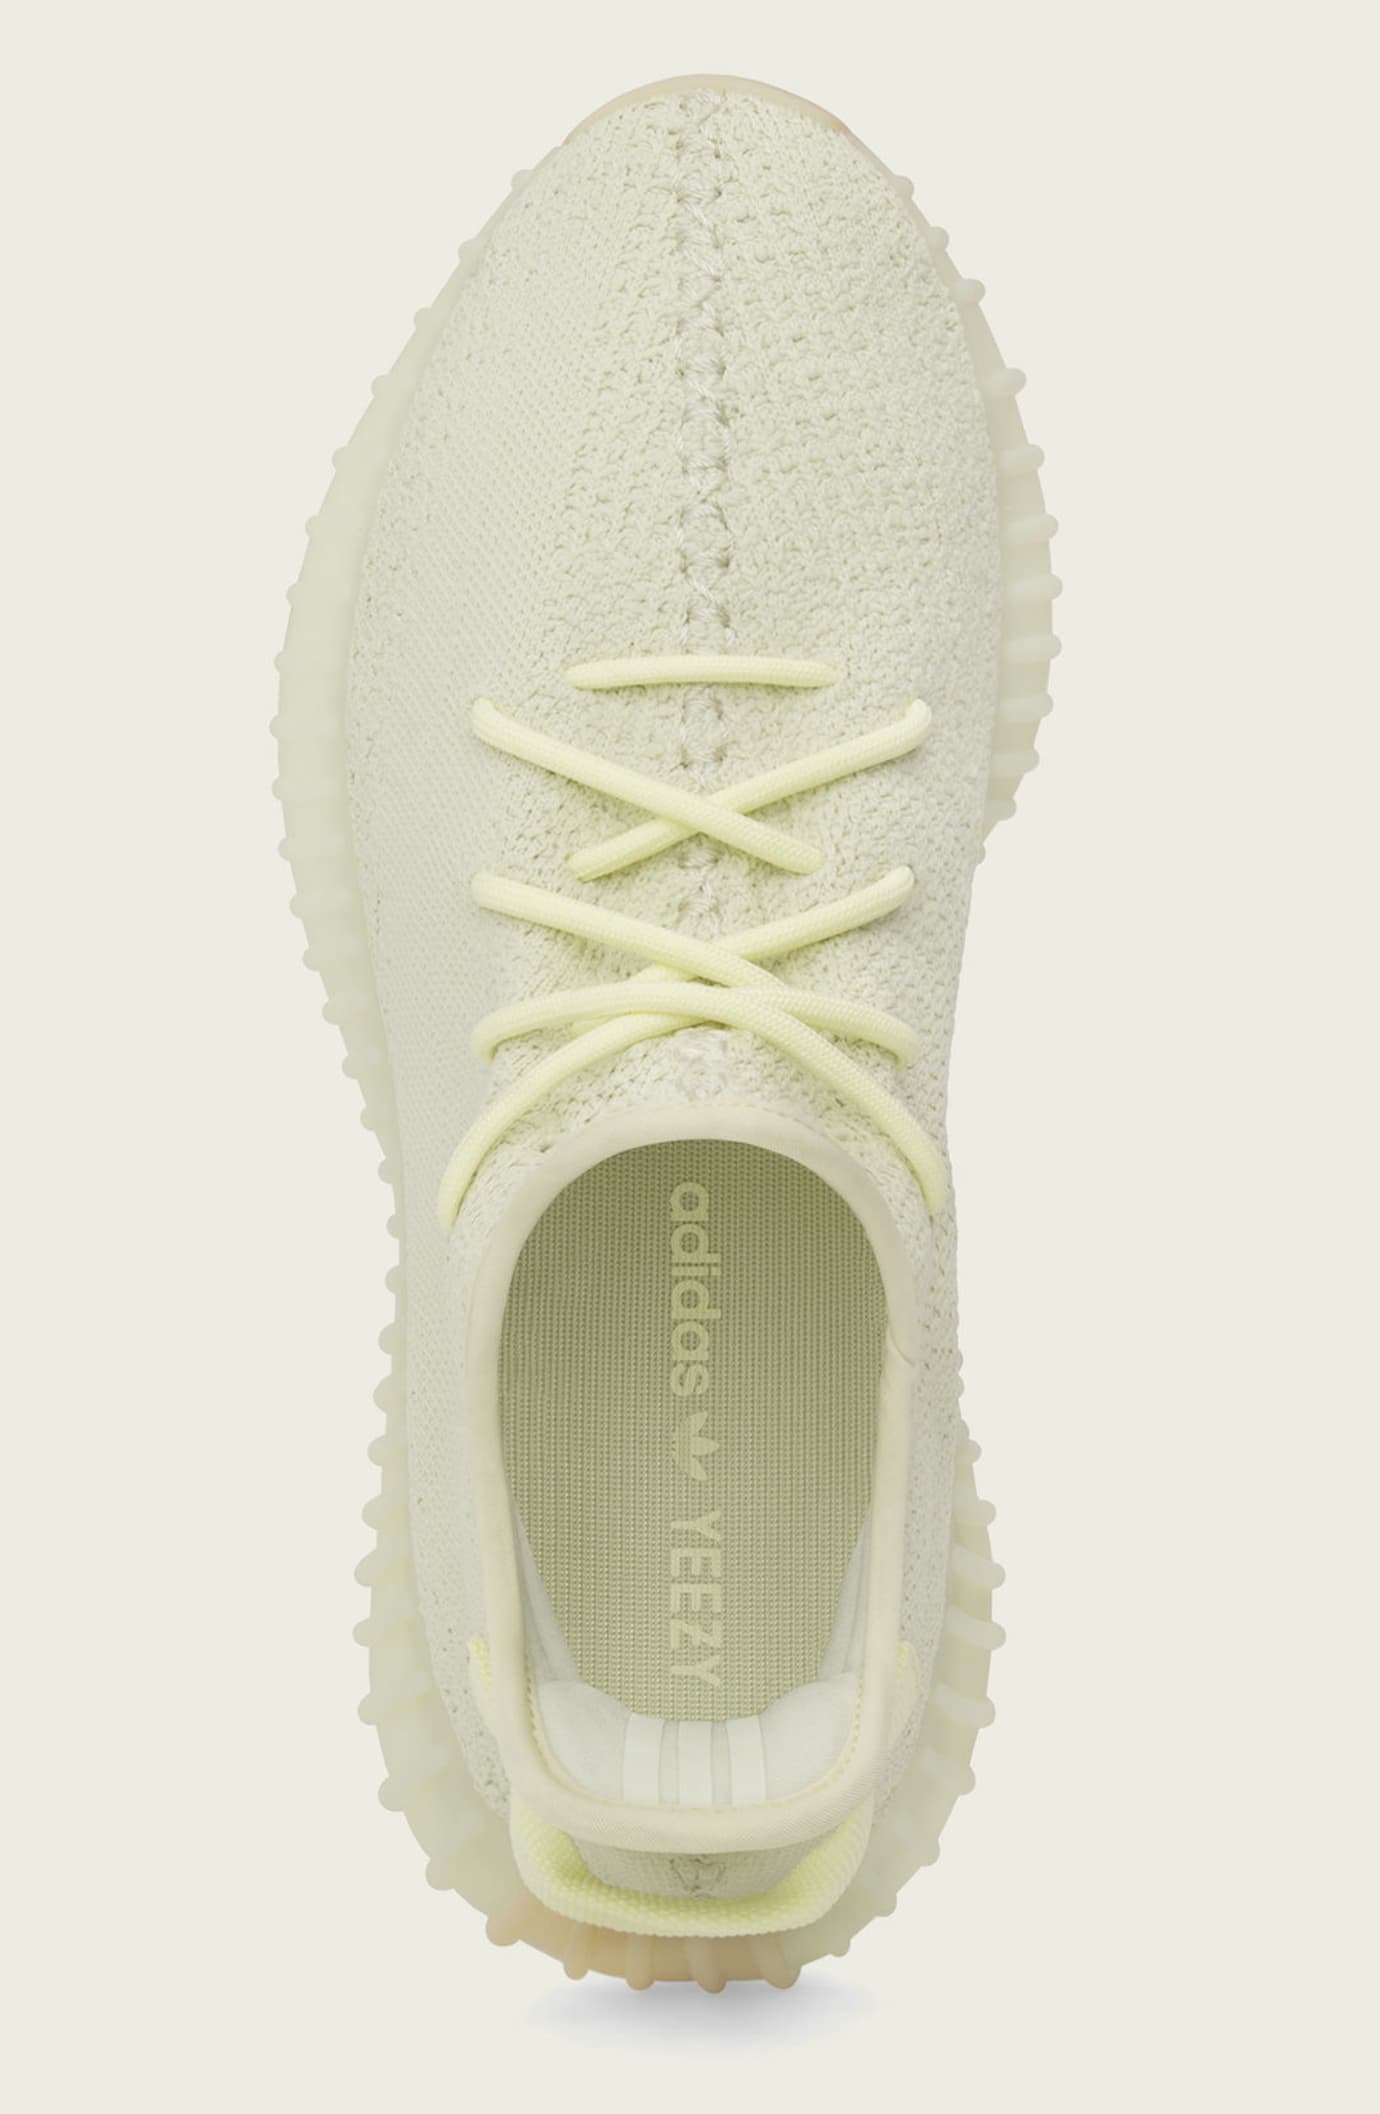 yeezy butter retail price